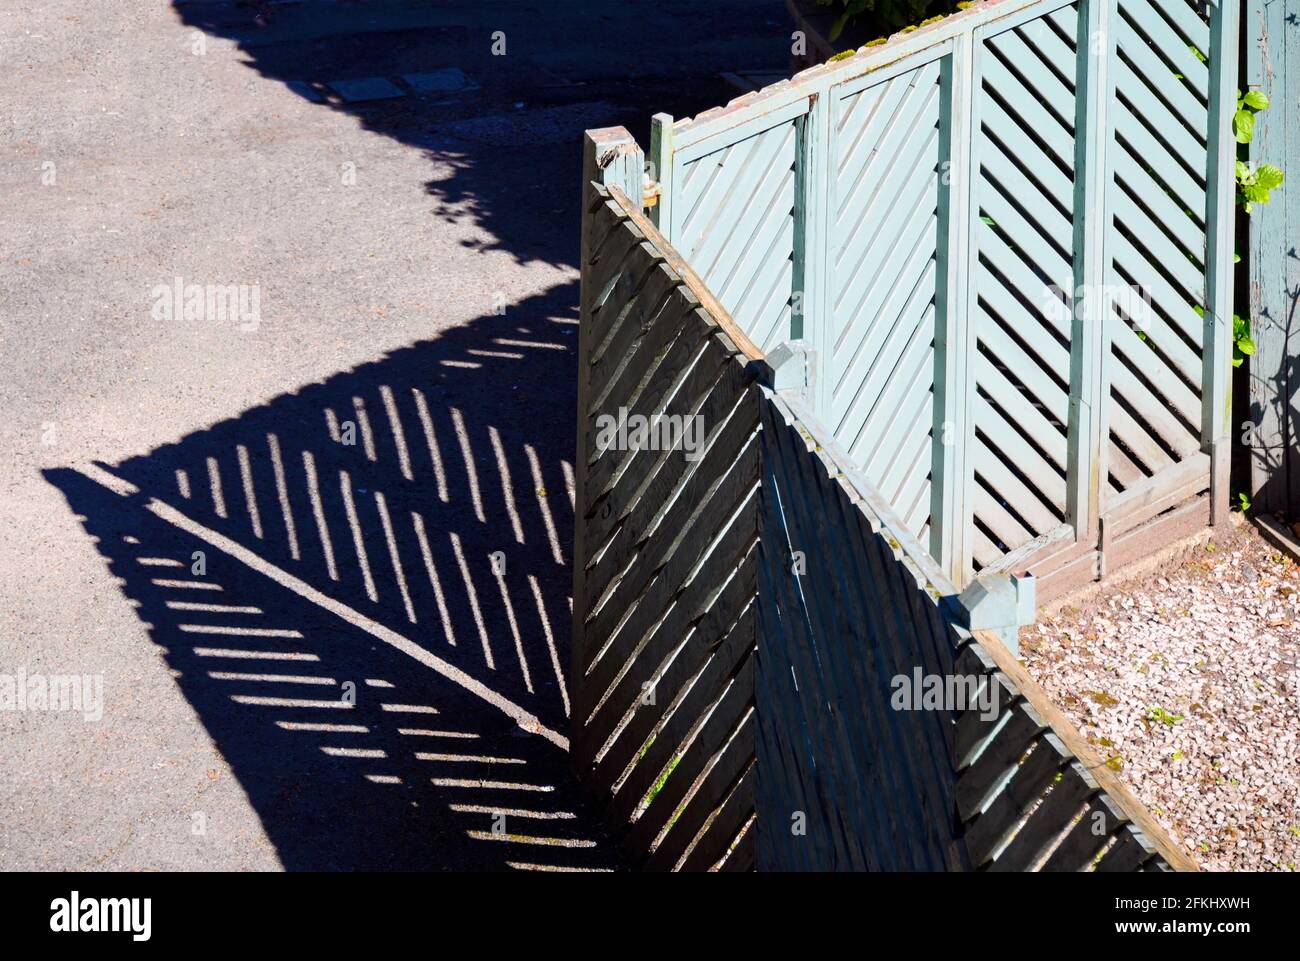 Green painted wooden garden gate and fence with shadows. Stock Photo